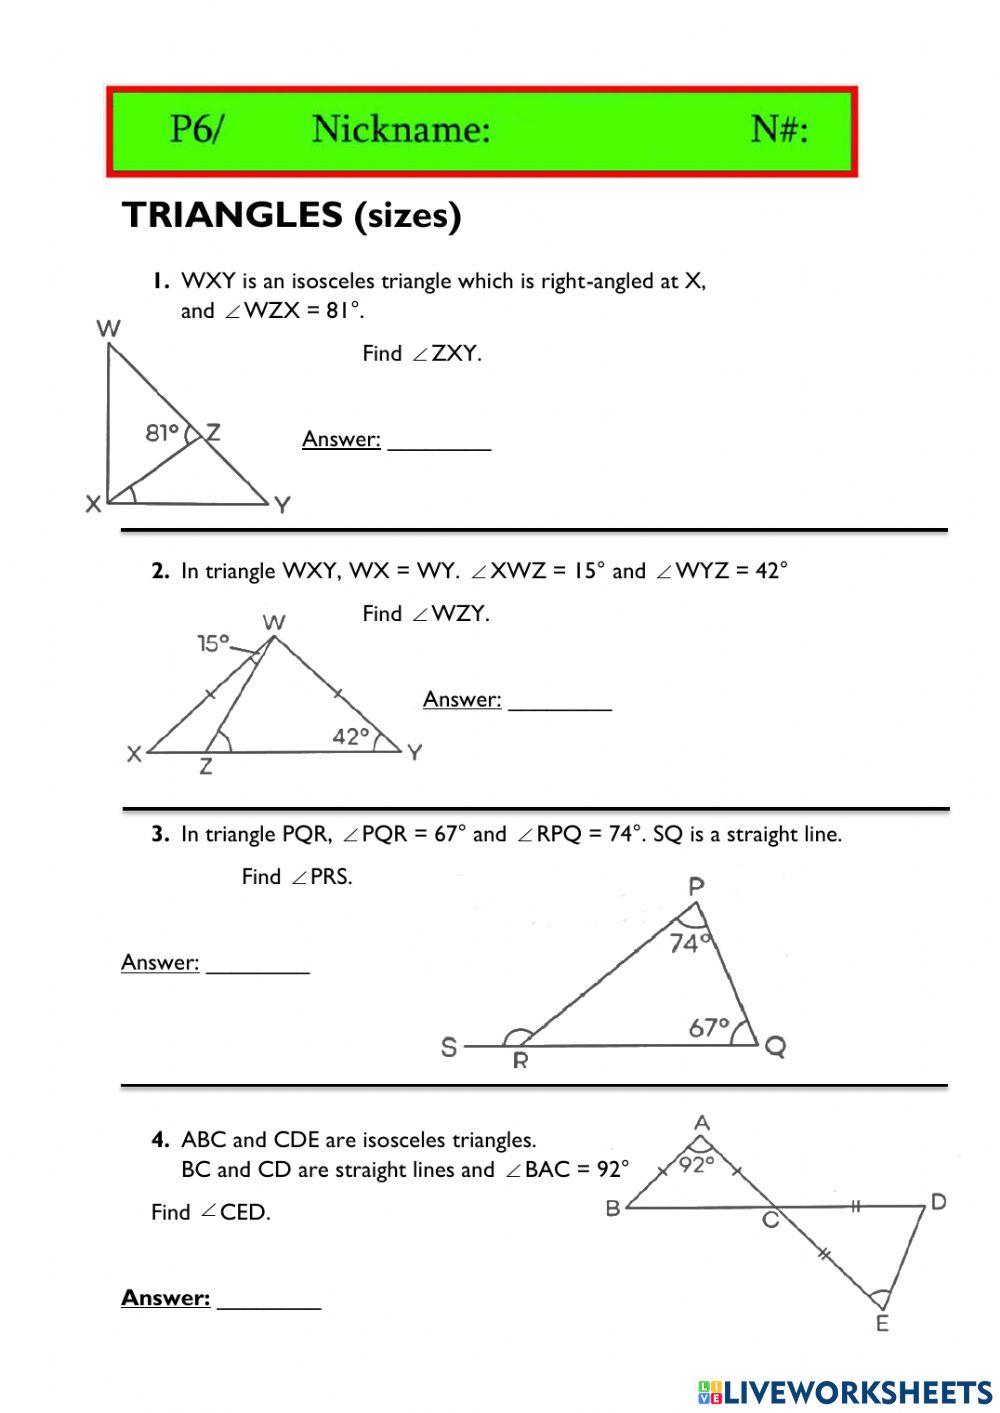 Triangles: find the angle 02